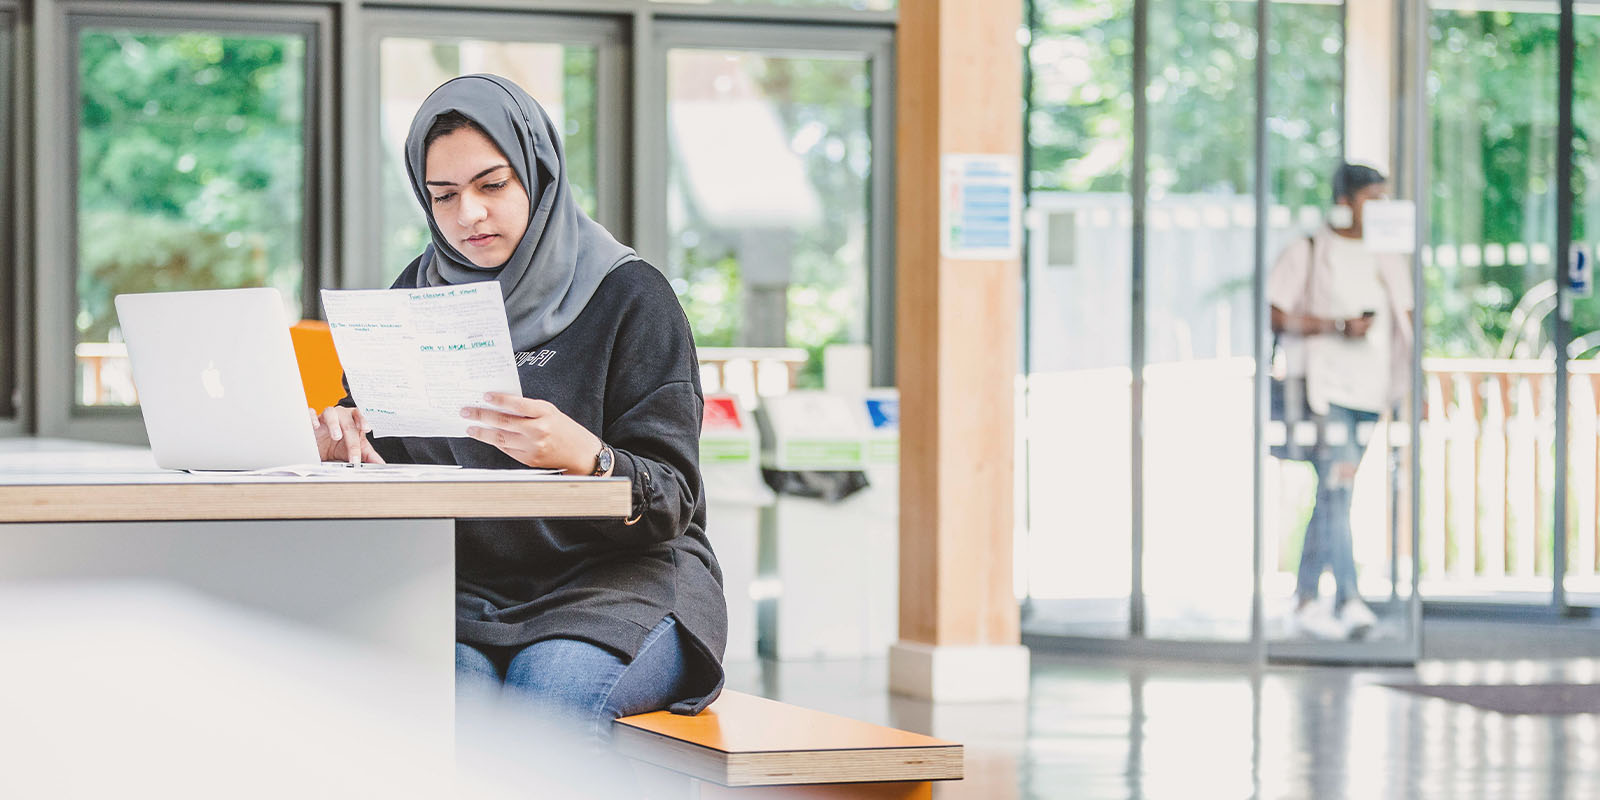 A student in a headscarf works at a laptop in the LICA foyer.